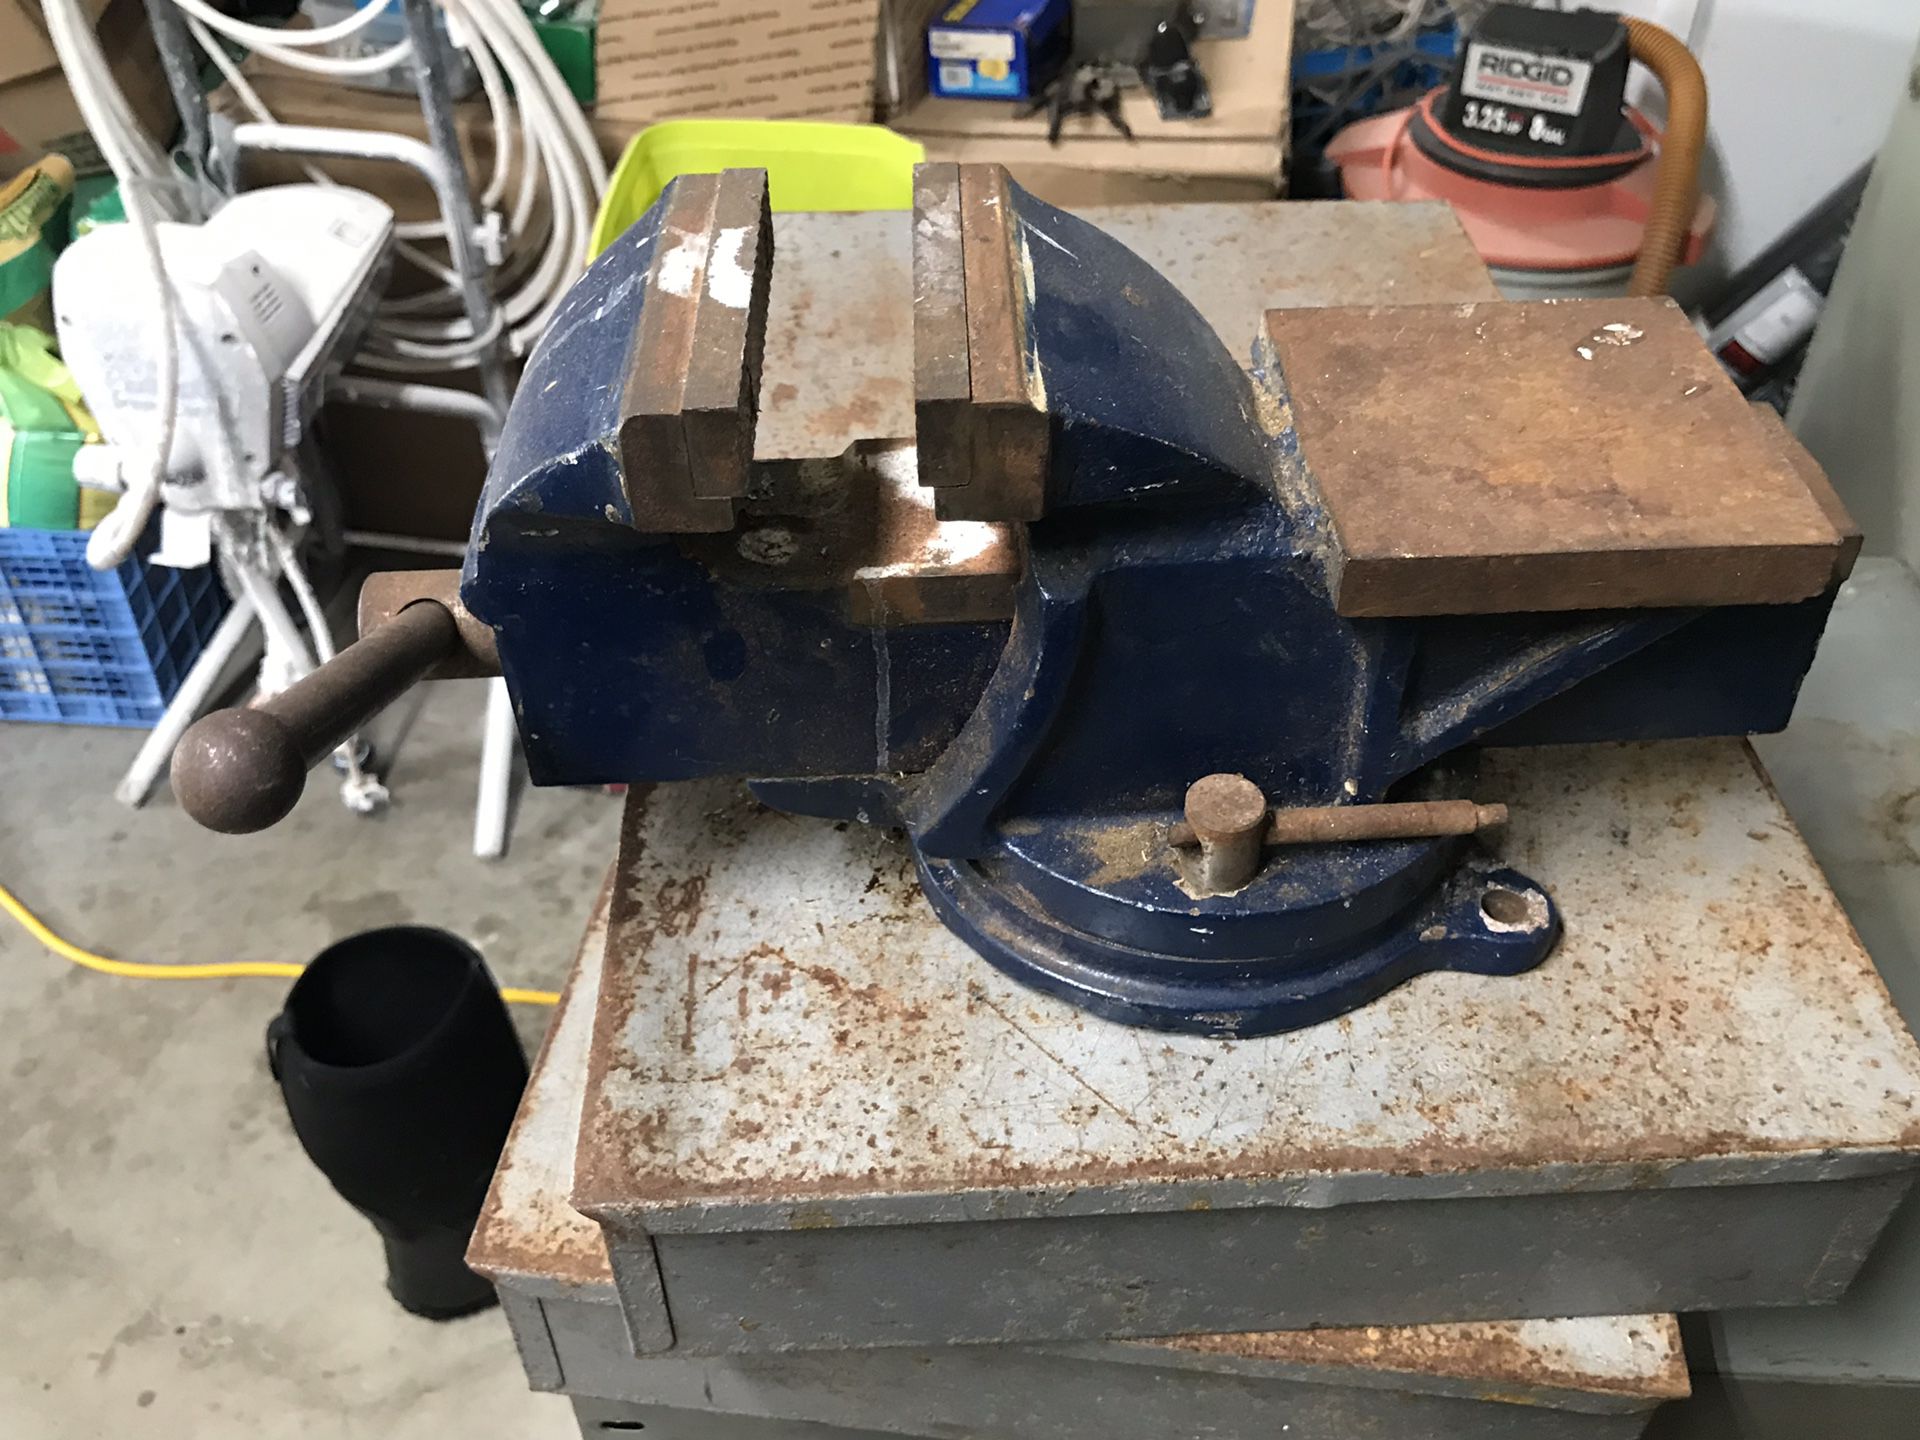 Bench vise with flat surface for hammering